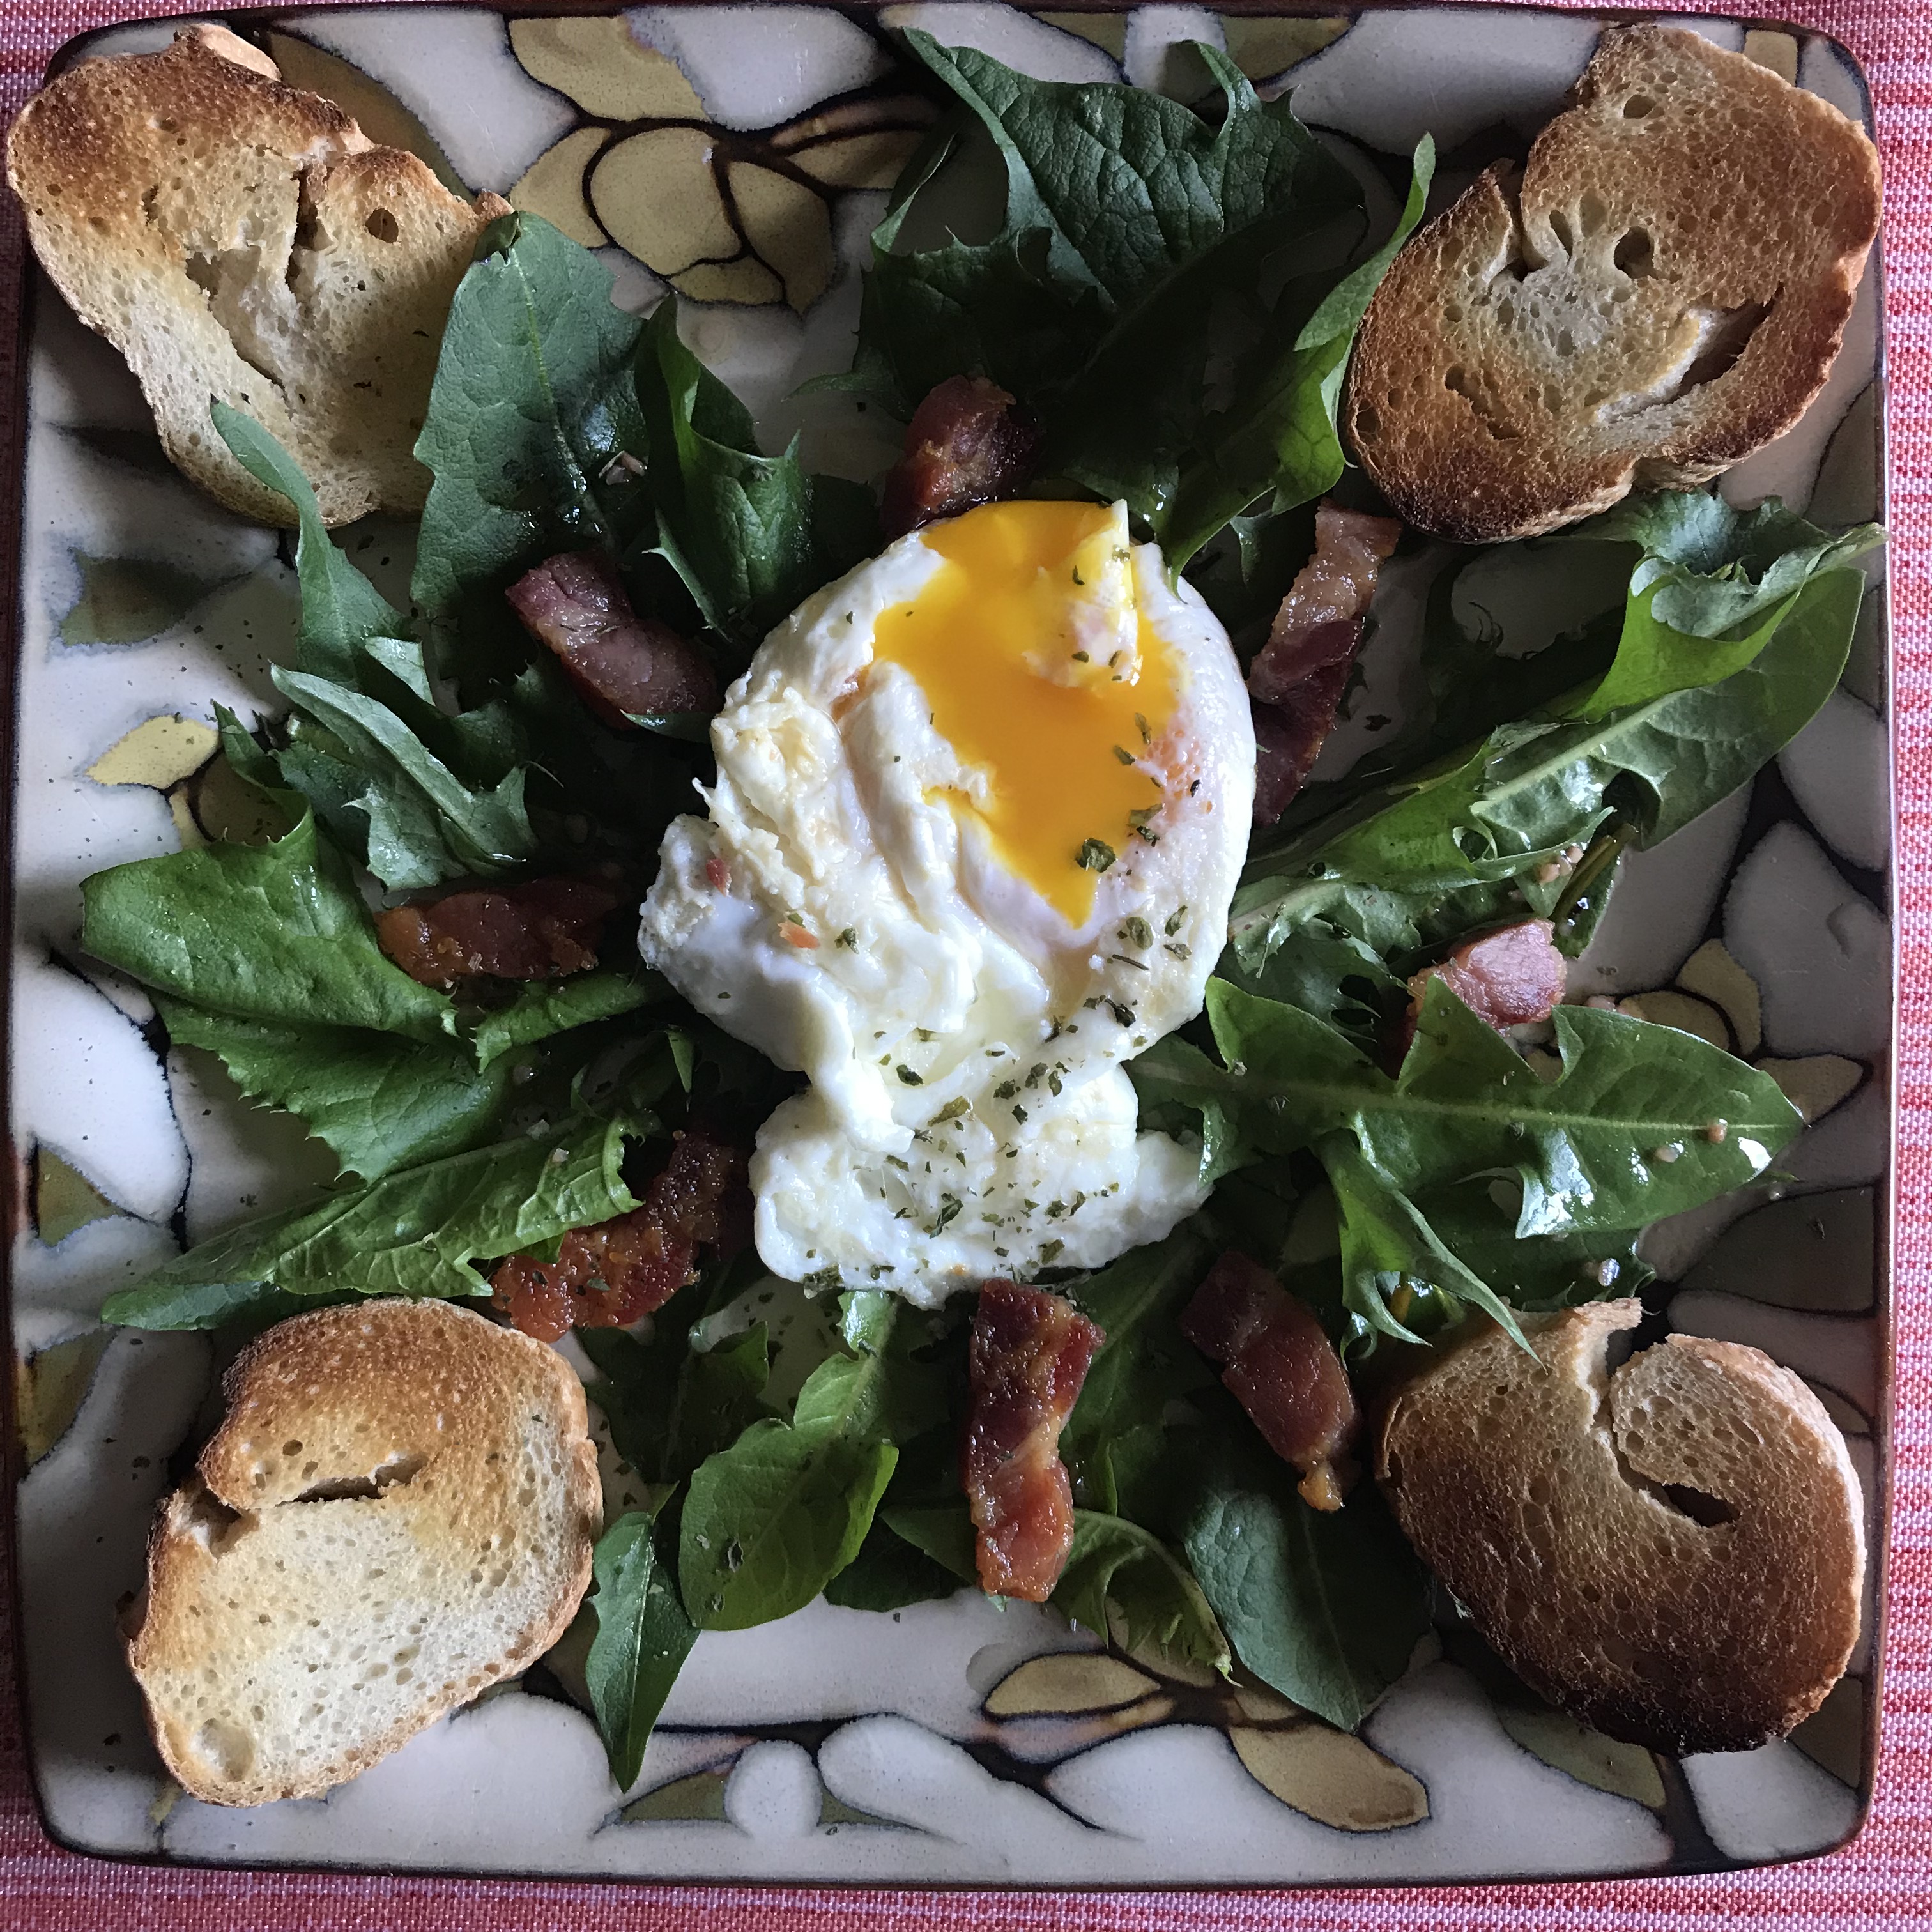 Dandelion salad Lyonnaise style with pancetta lardons; poached egg in center of greens with bacon bits and croutons in the periphery